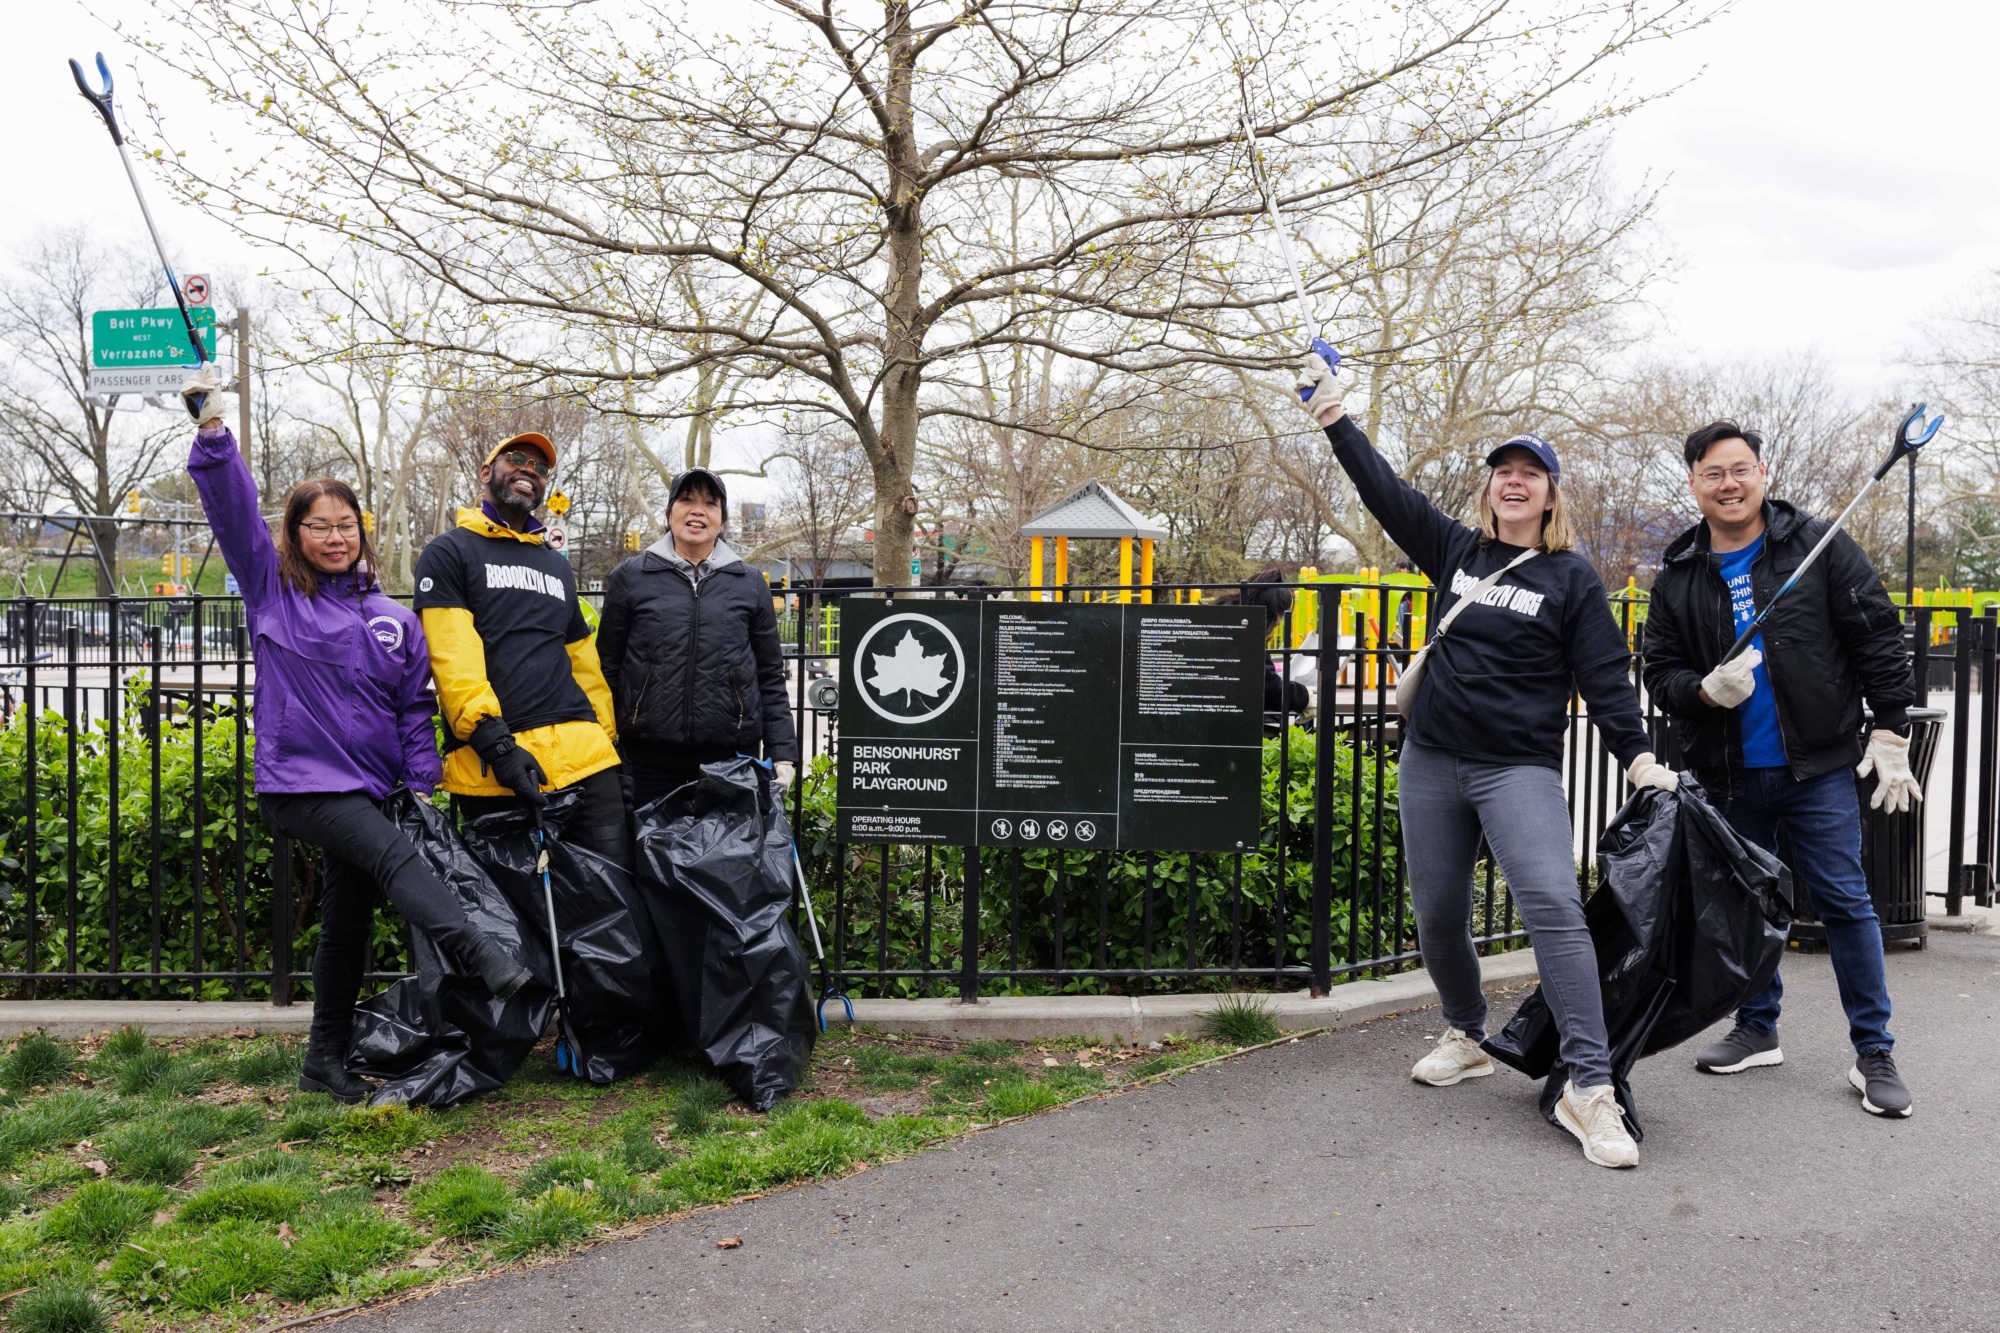 Five volunteers holding trash bags, smiling and celebrating during a clean-up event in a park, with trees and a cloudy sky in the background.